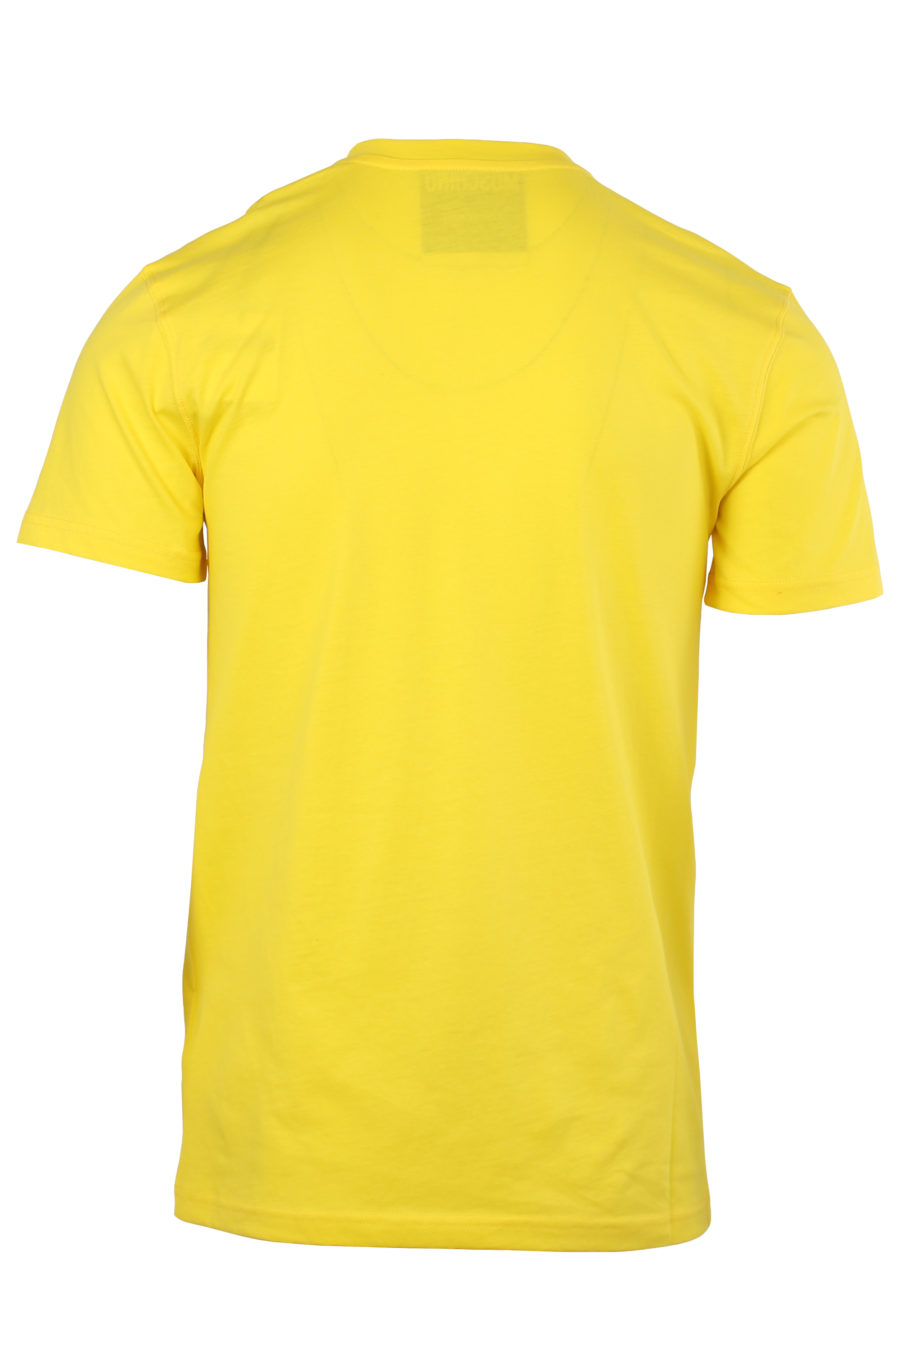 Yellow "Smiley" T-shirt with embroidered logo - IMG 9975